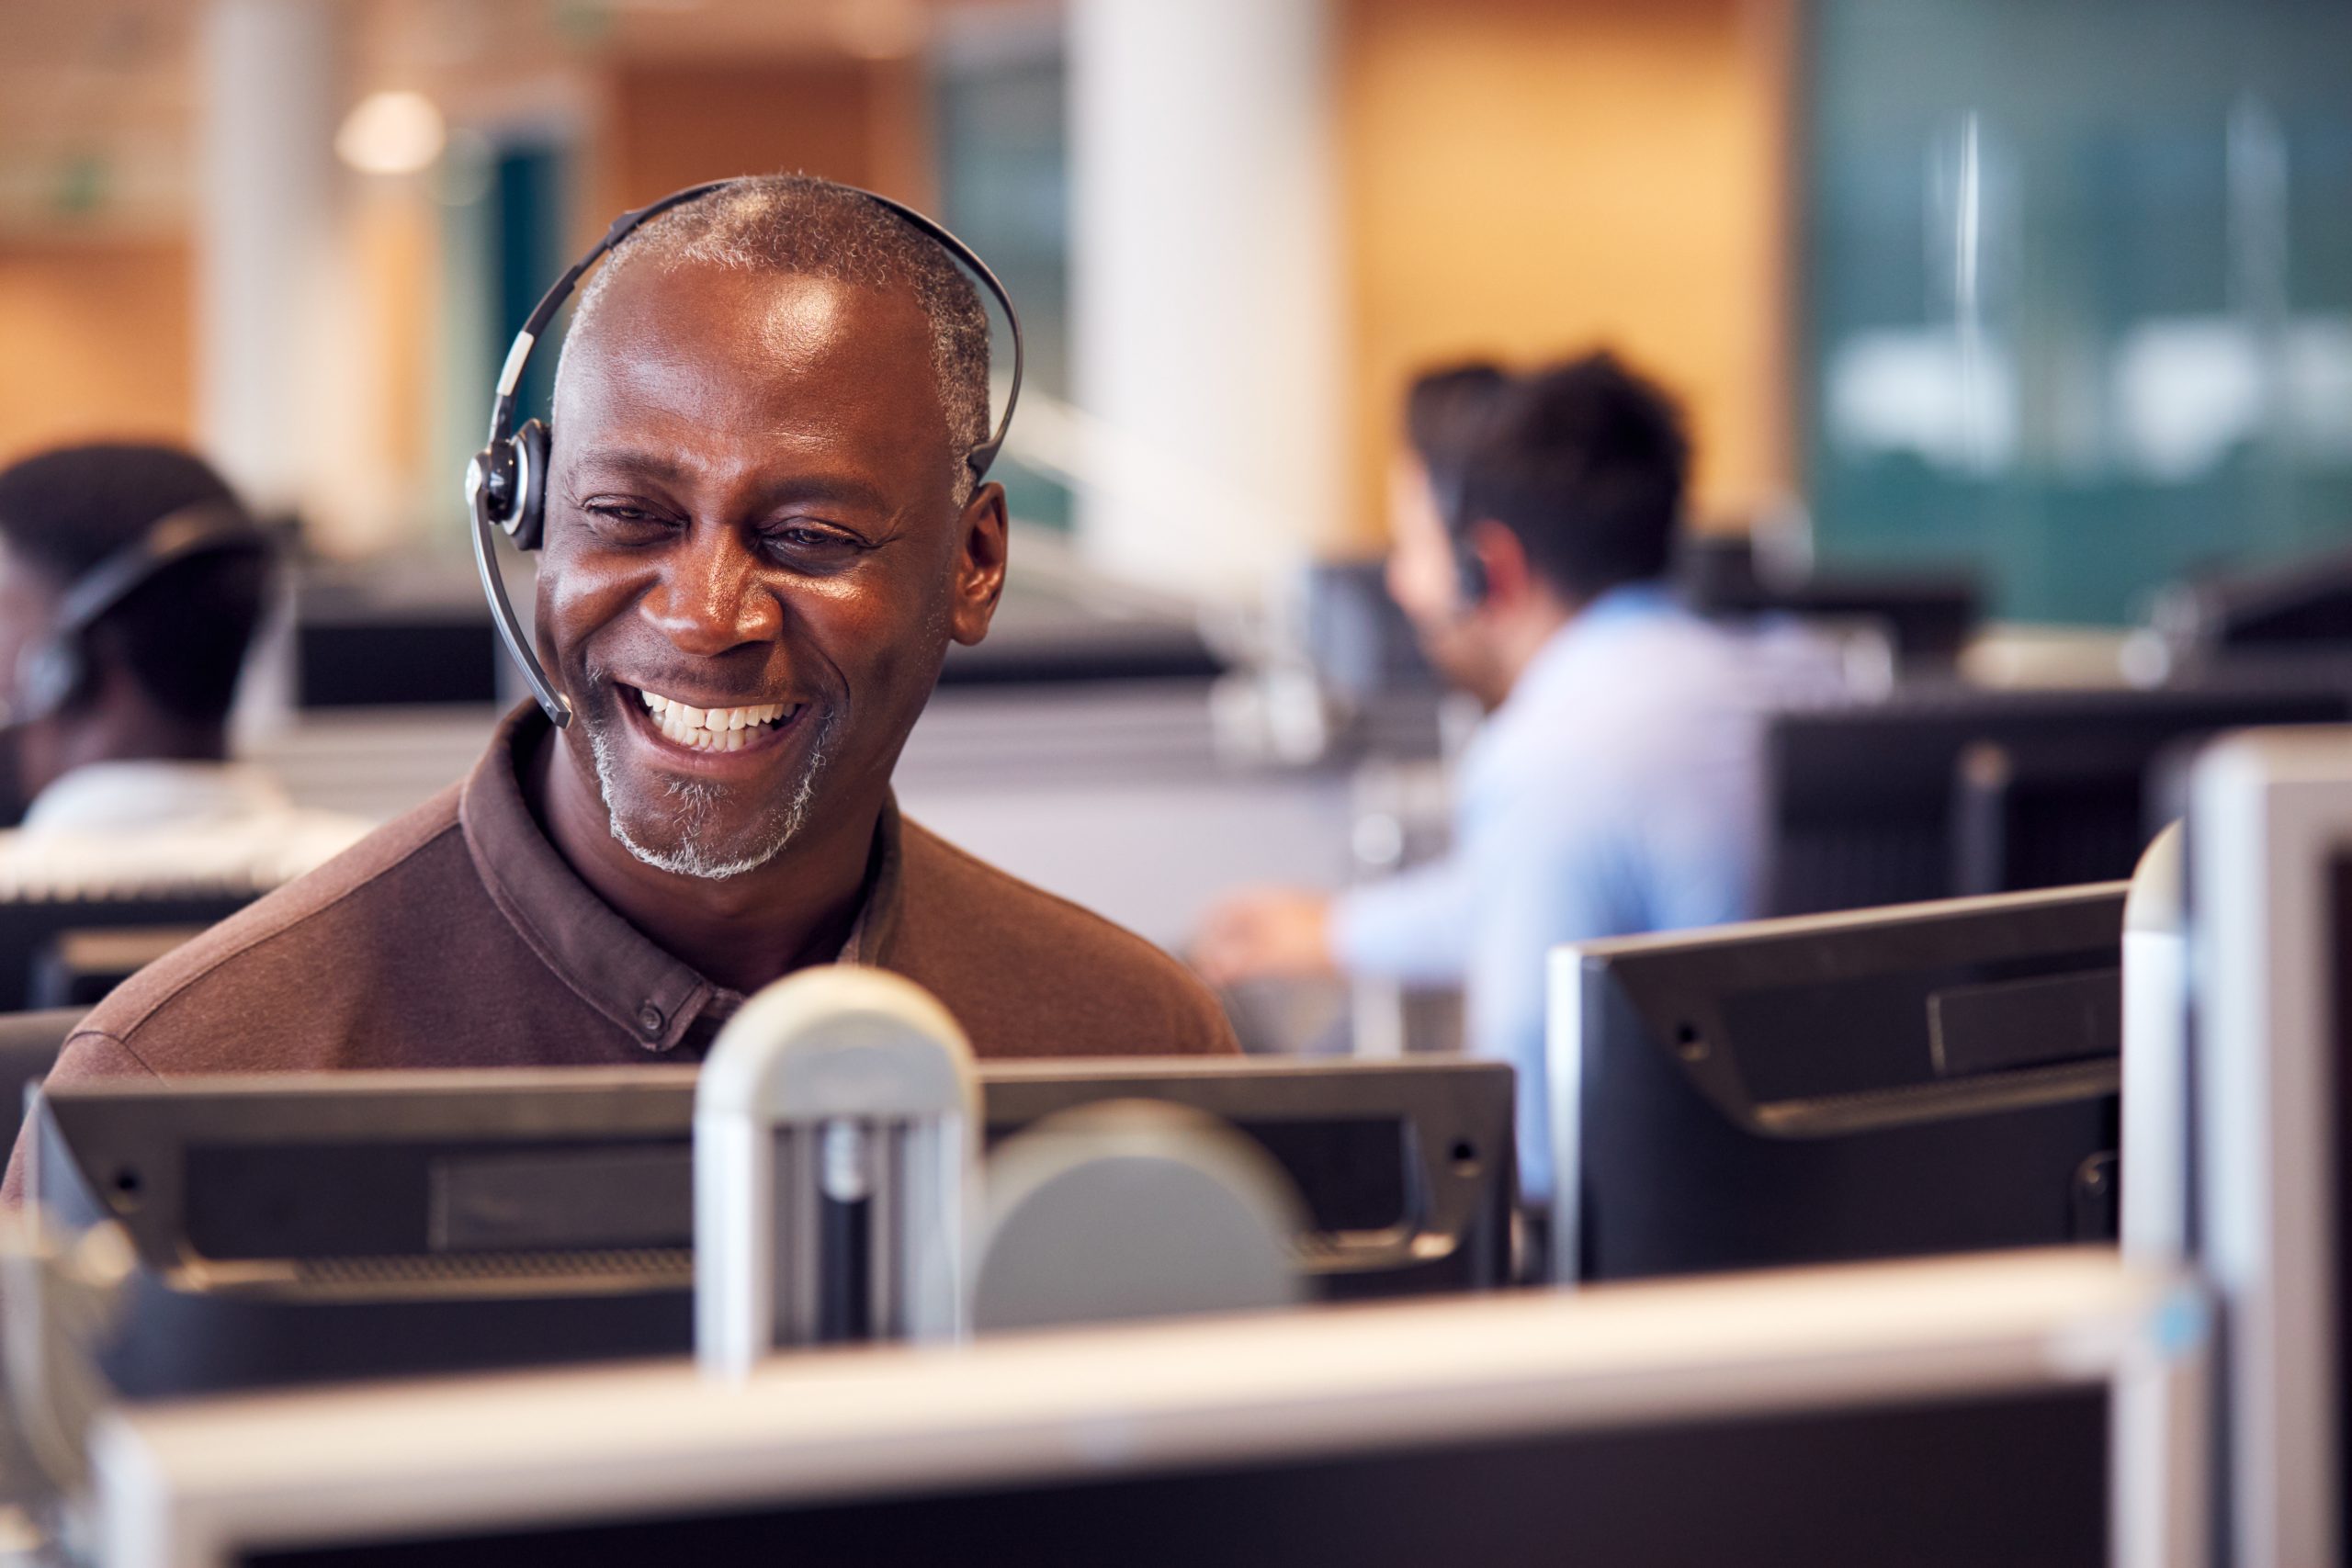 Male model smiling while wearing a headset in front of a computer monitor.